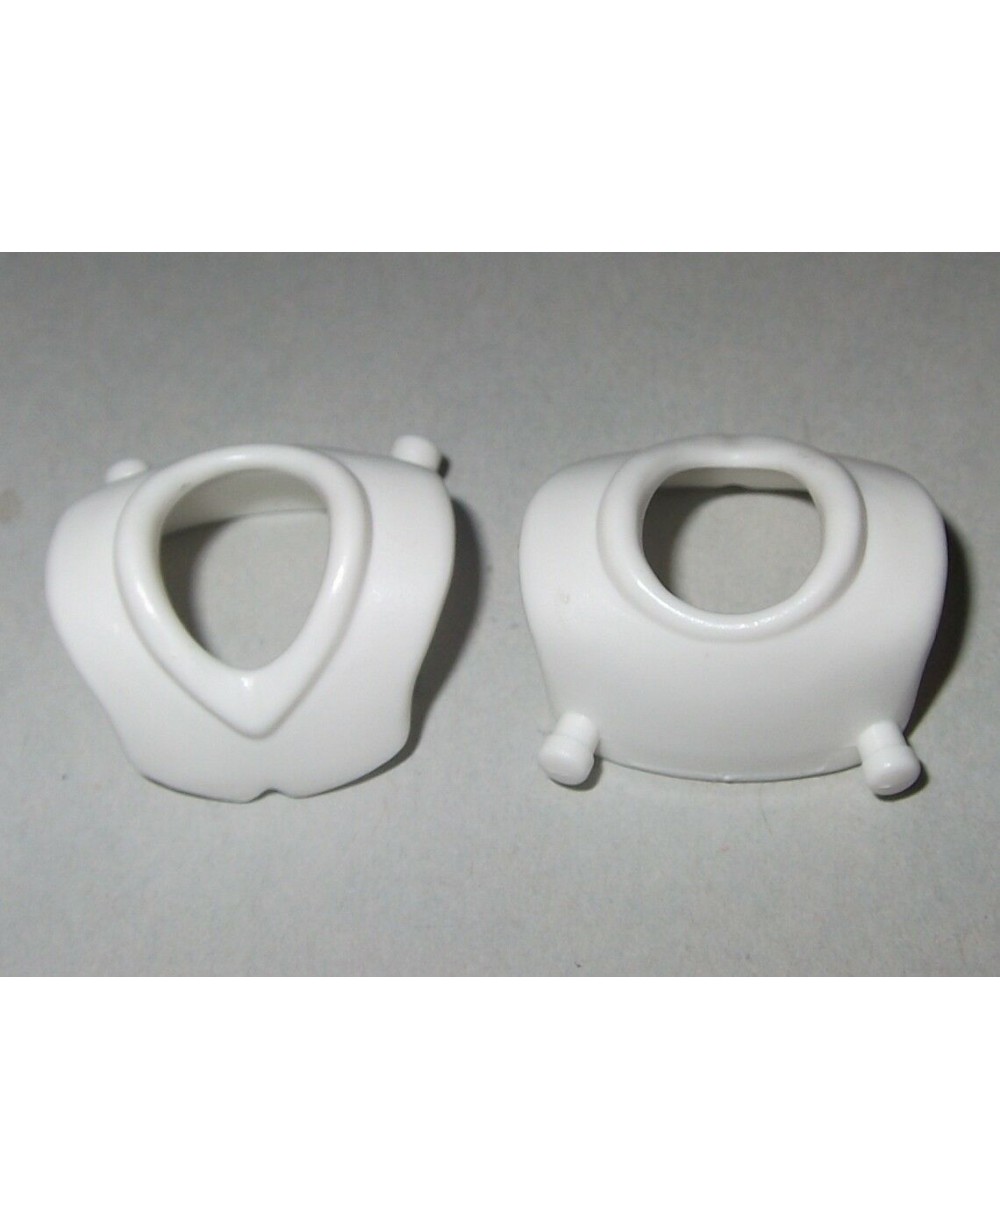 medieval 242035 2 dungaree clips white 2u playmobil breastplate 